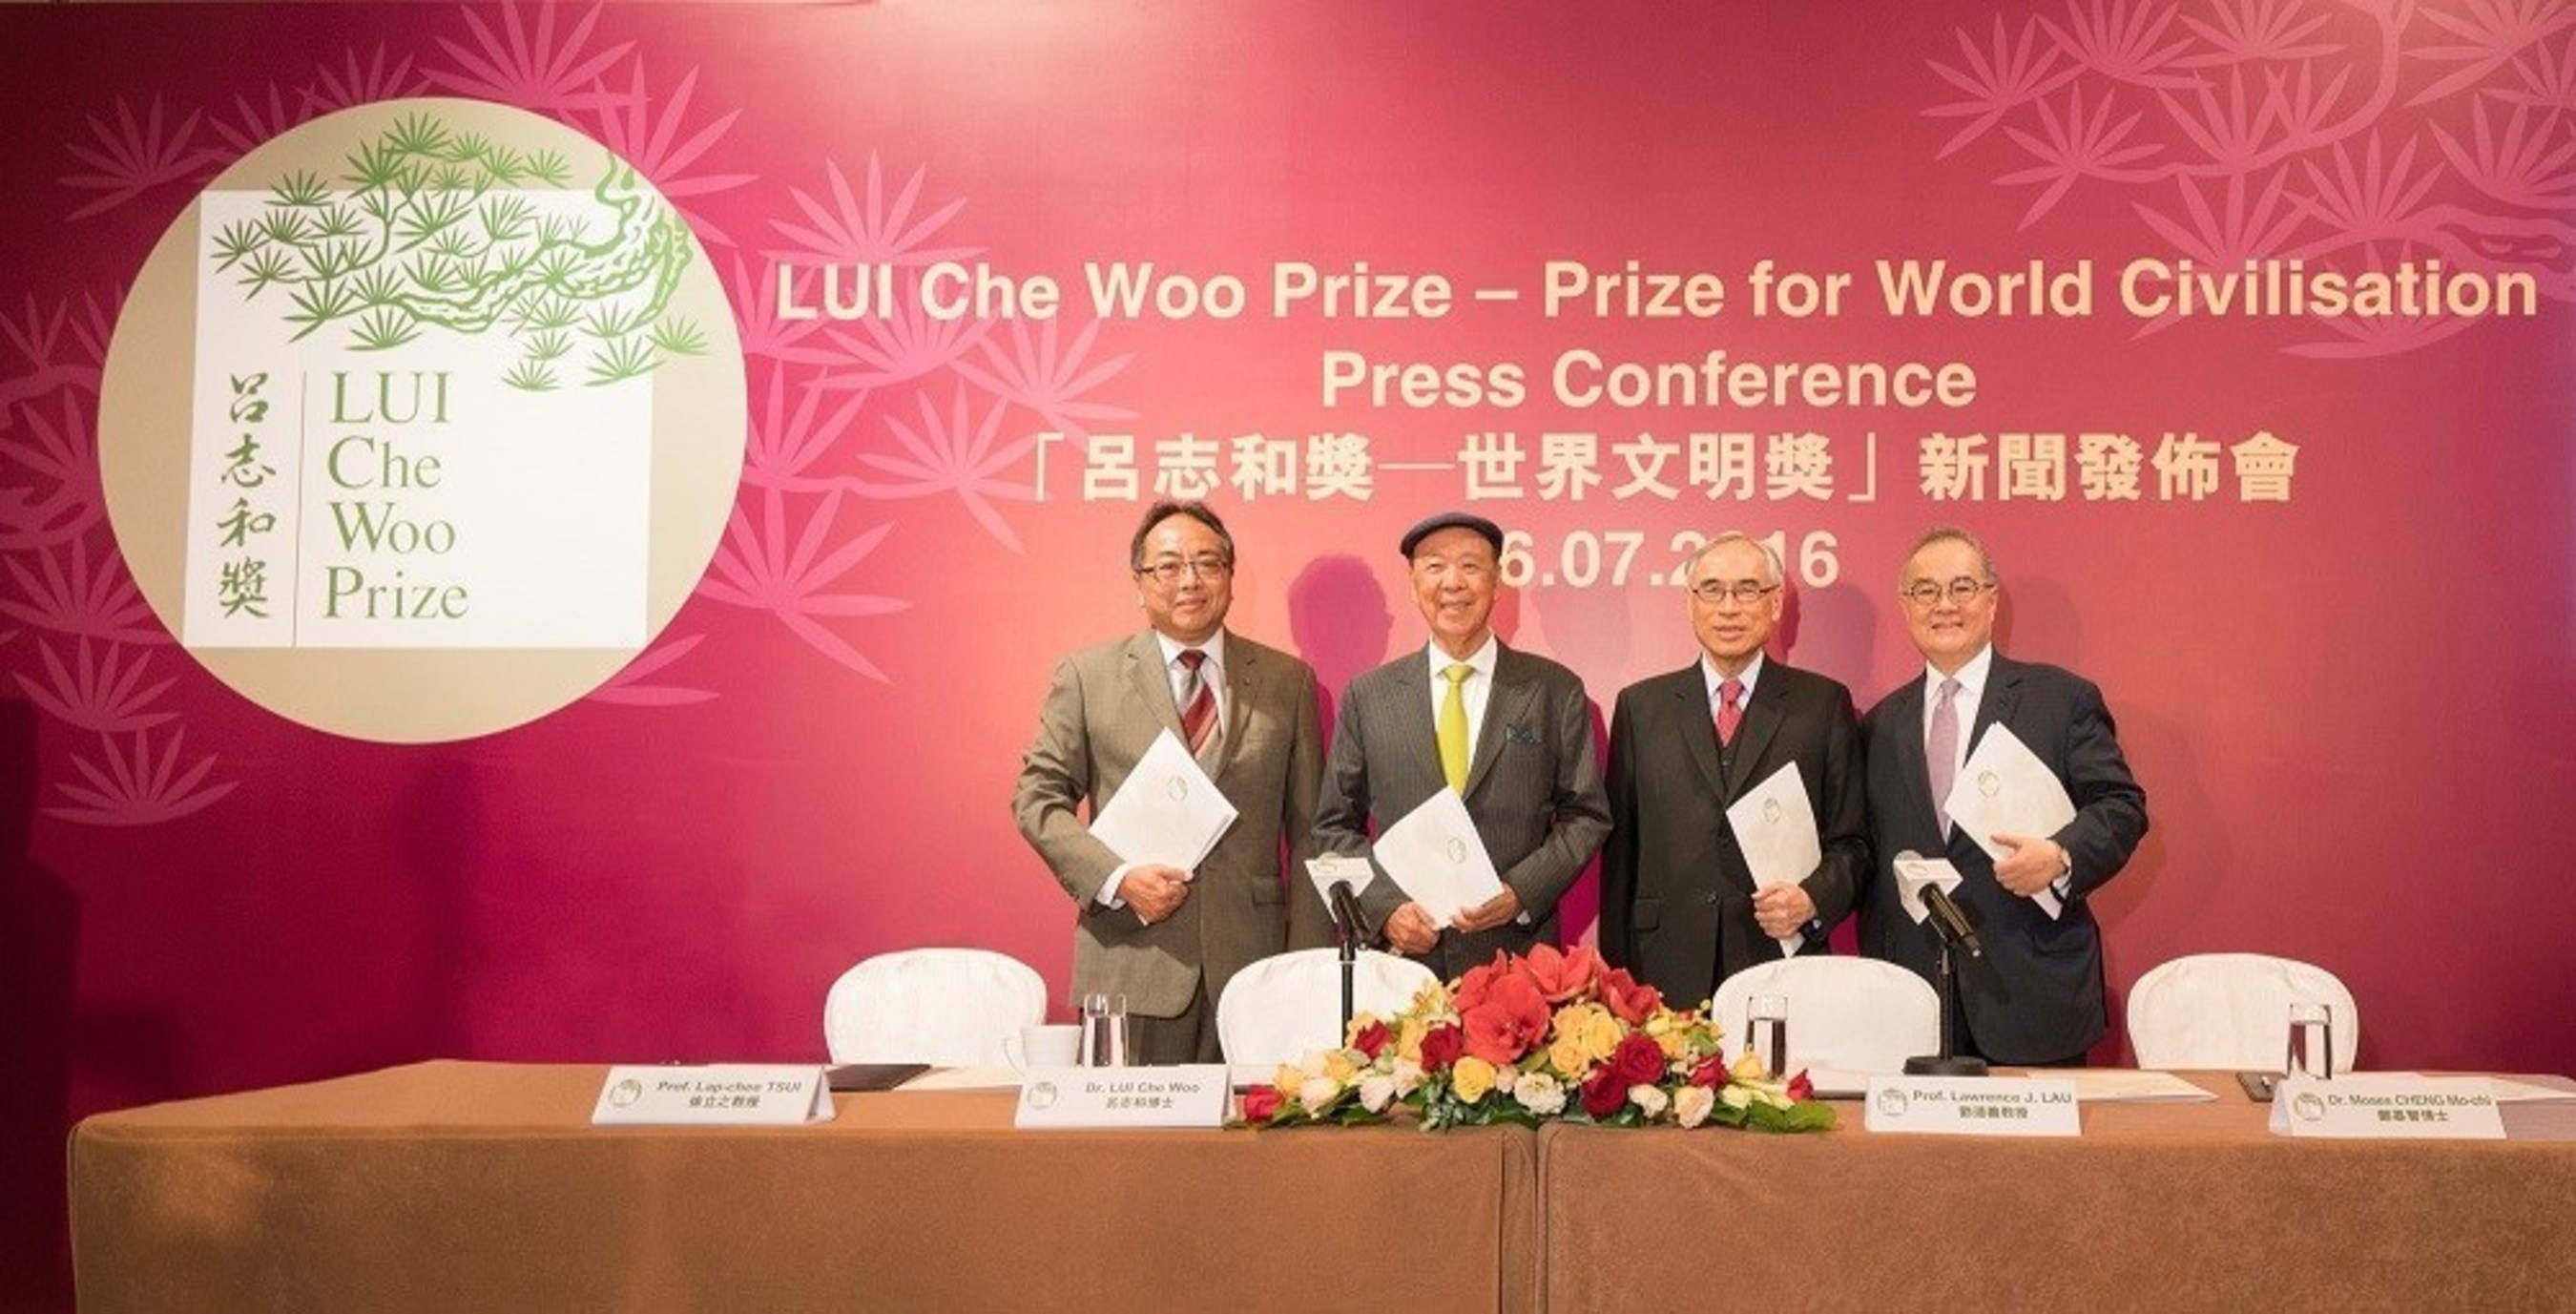 From left: Prof. Lap-Chee Tsui, Member, Board of Governors, LUI Che Woo Prize Limited; Dr. Lui Che Woo, Founder & Chairman of the Board of Governors cum Prize Council, LUI Che Woo Prize; Prof. Lawrence J. Lau, Chairman, Prize Recommendation Committee, LUI Che Woo Prize; Dr. Moses Cheng, Member, Board of Governors, LUI Che Woo Prize Limited